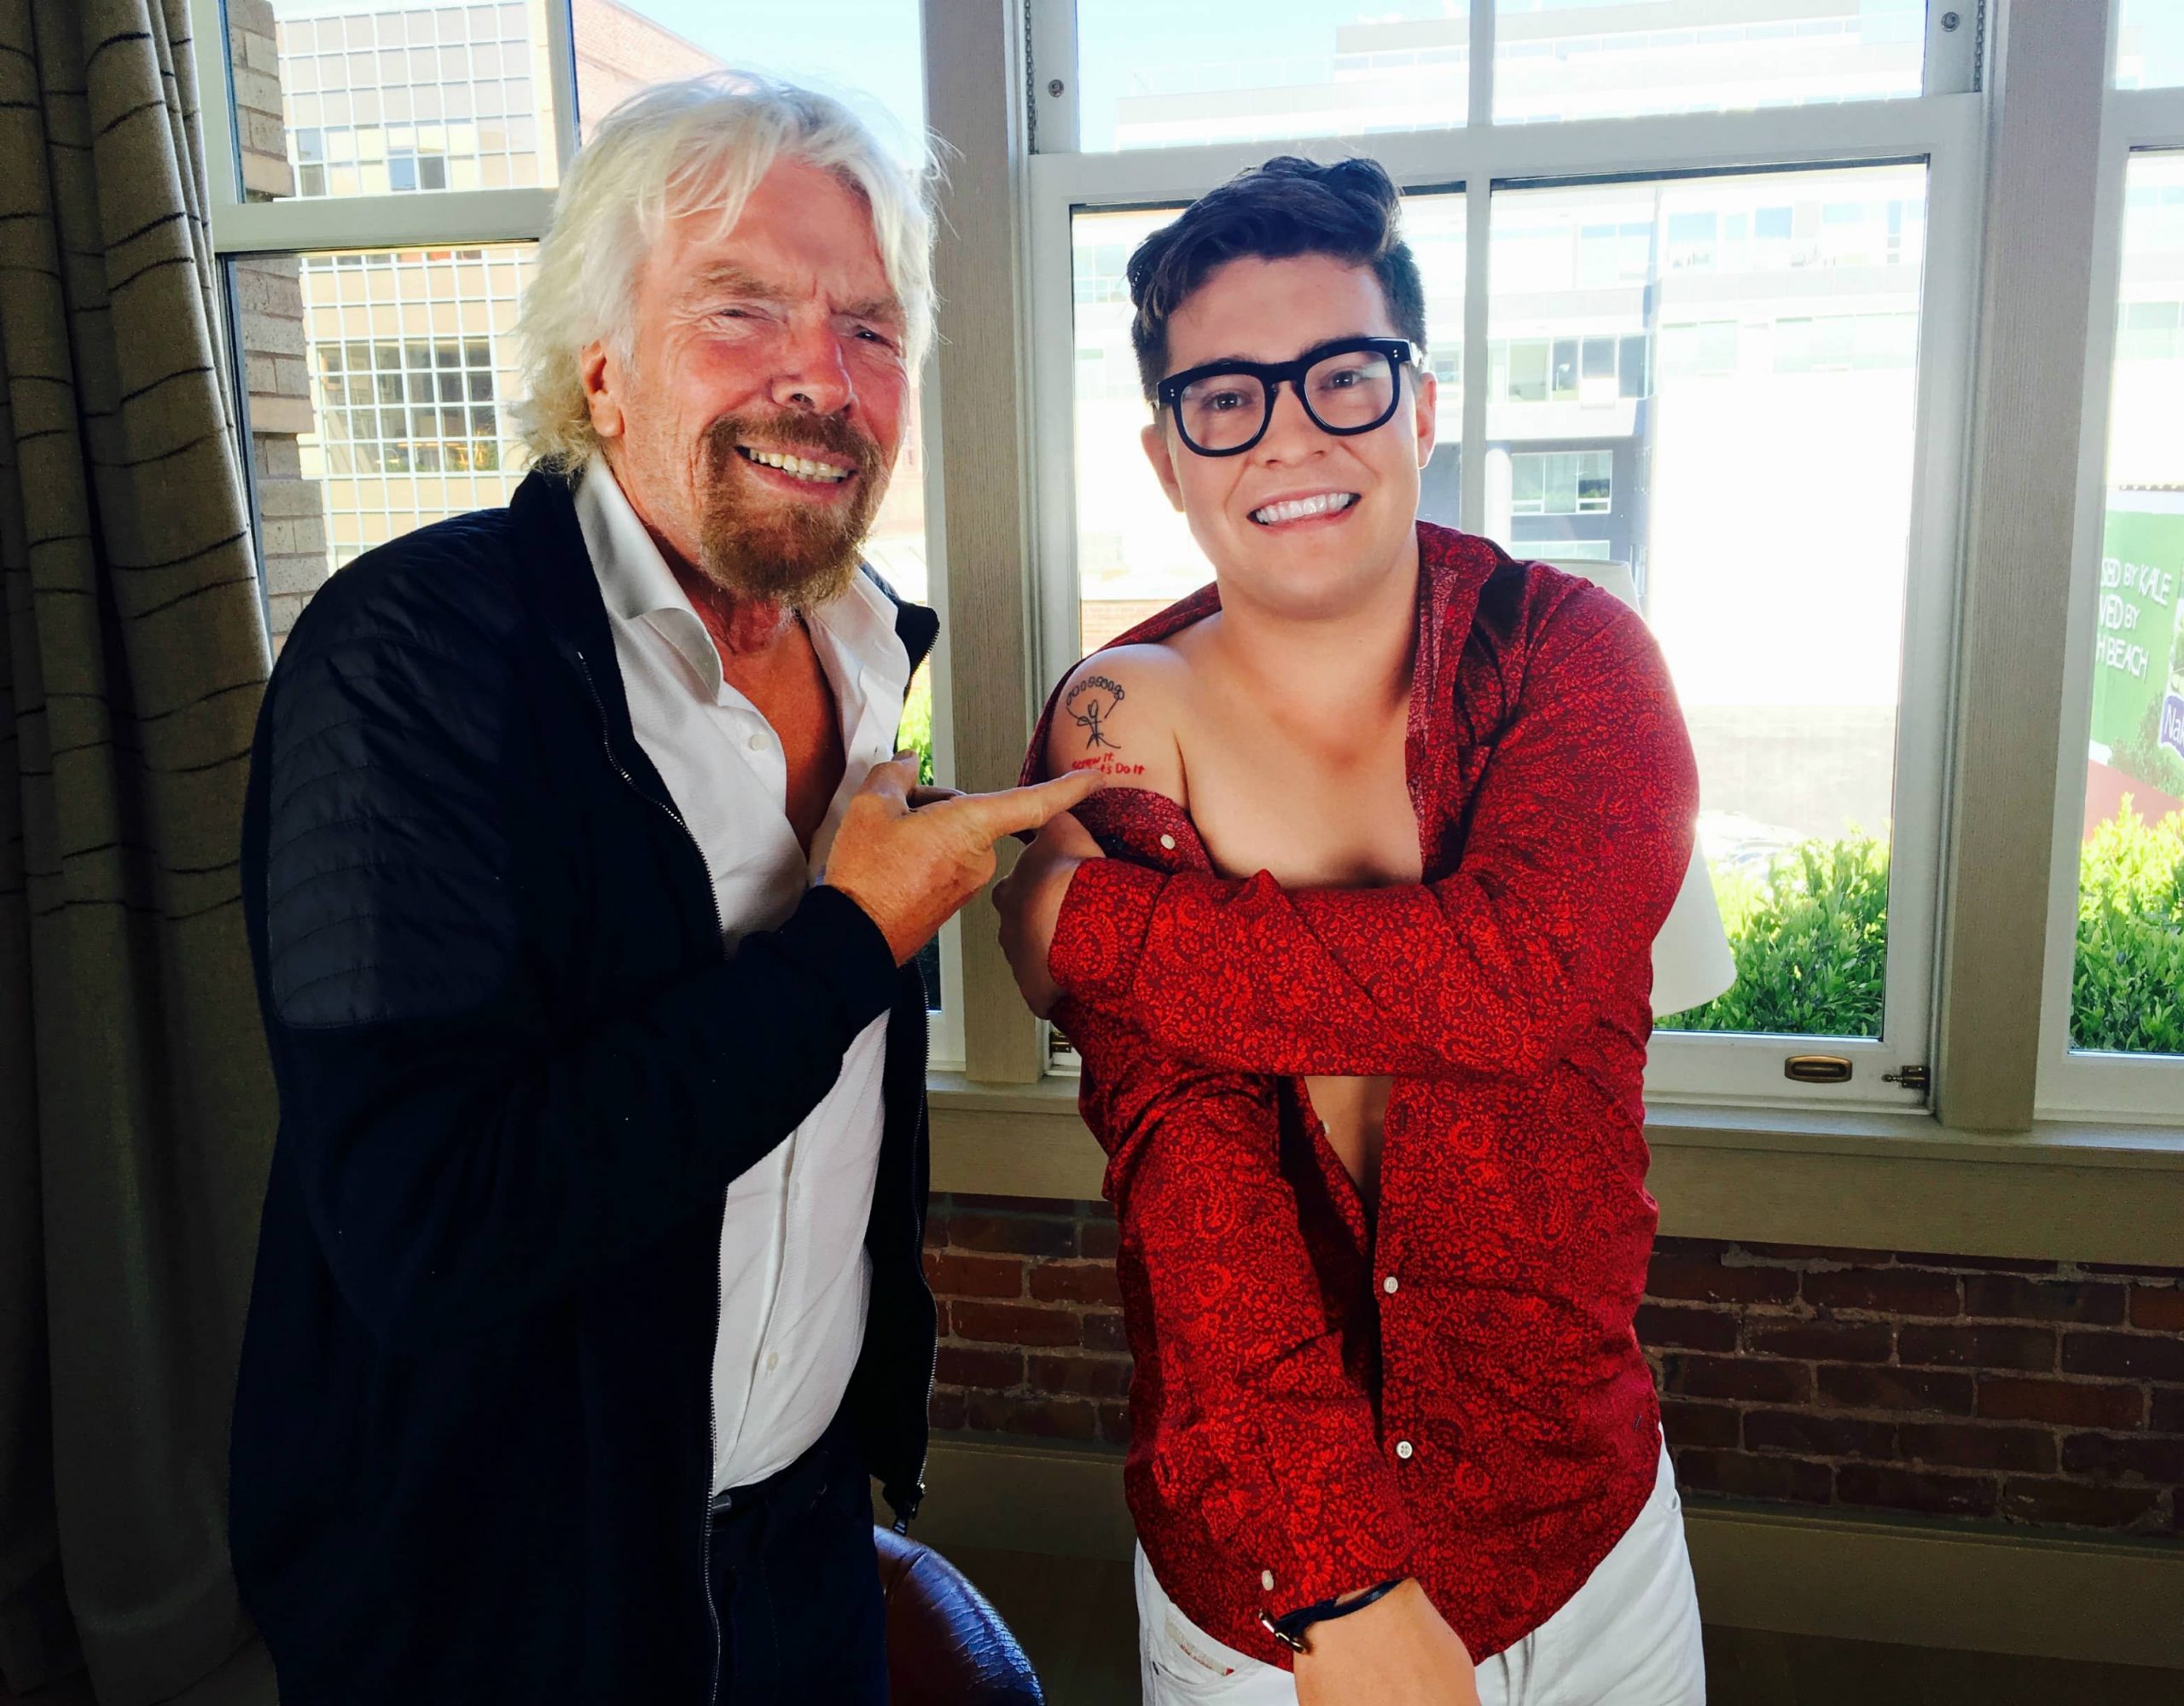 Founder of Virgin Group Richard Branson pictured with Unfiltered co-founder